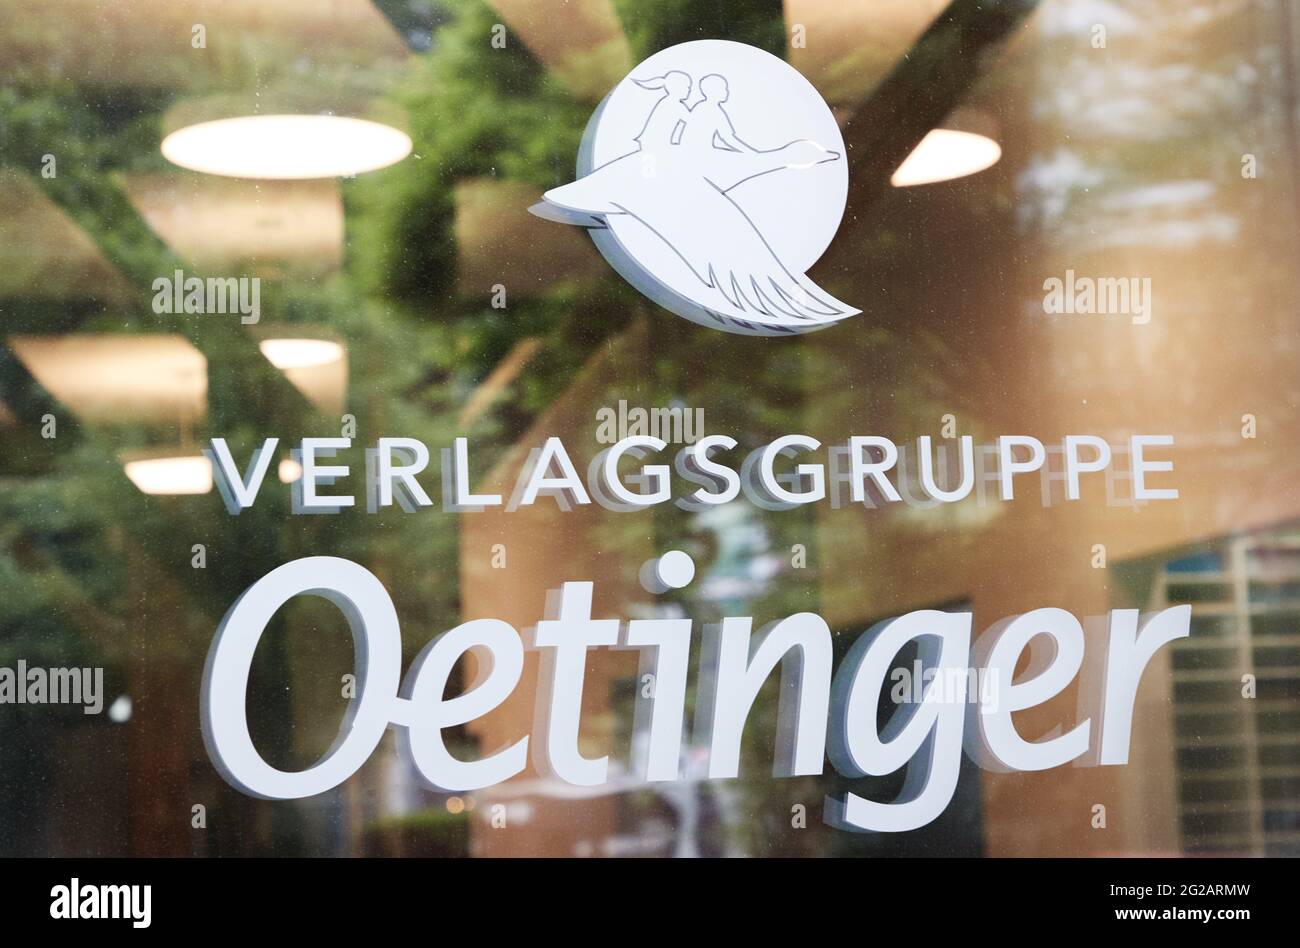 Hamburg Germany 07th June 21 A Logo And The Words Verlagsgruppe Oetinger Stand On A Pane Of Glass Next To The Entrance To The Newly Occupied Building Of The Publishing House Of